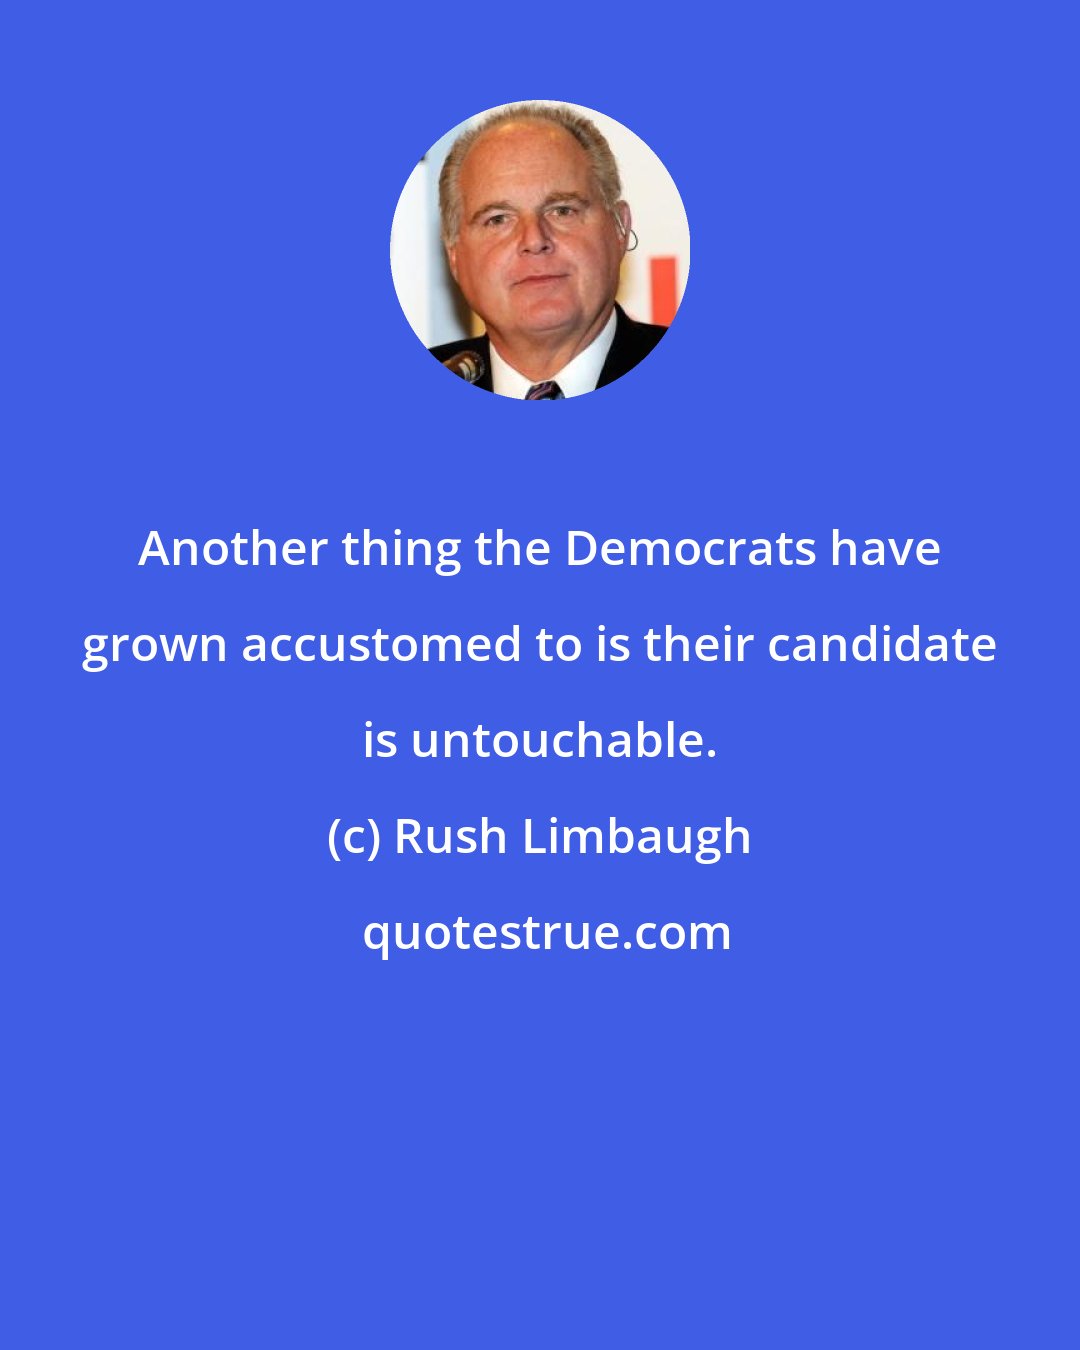 Rush Limbaugh: Another thing the Democrats have grown accustomed to is their candidate is untouchable.